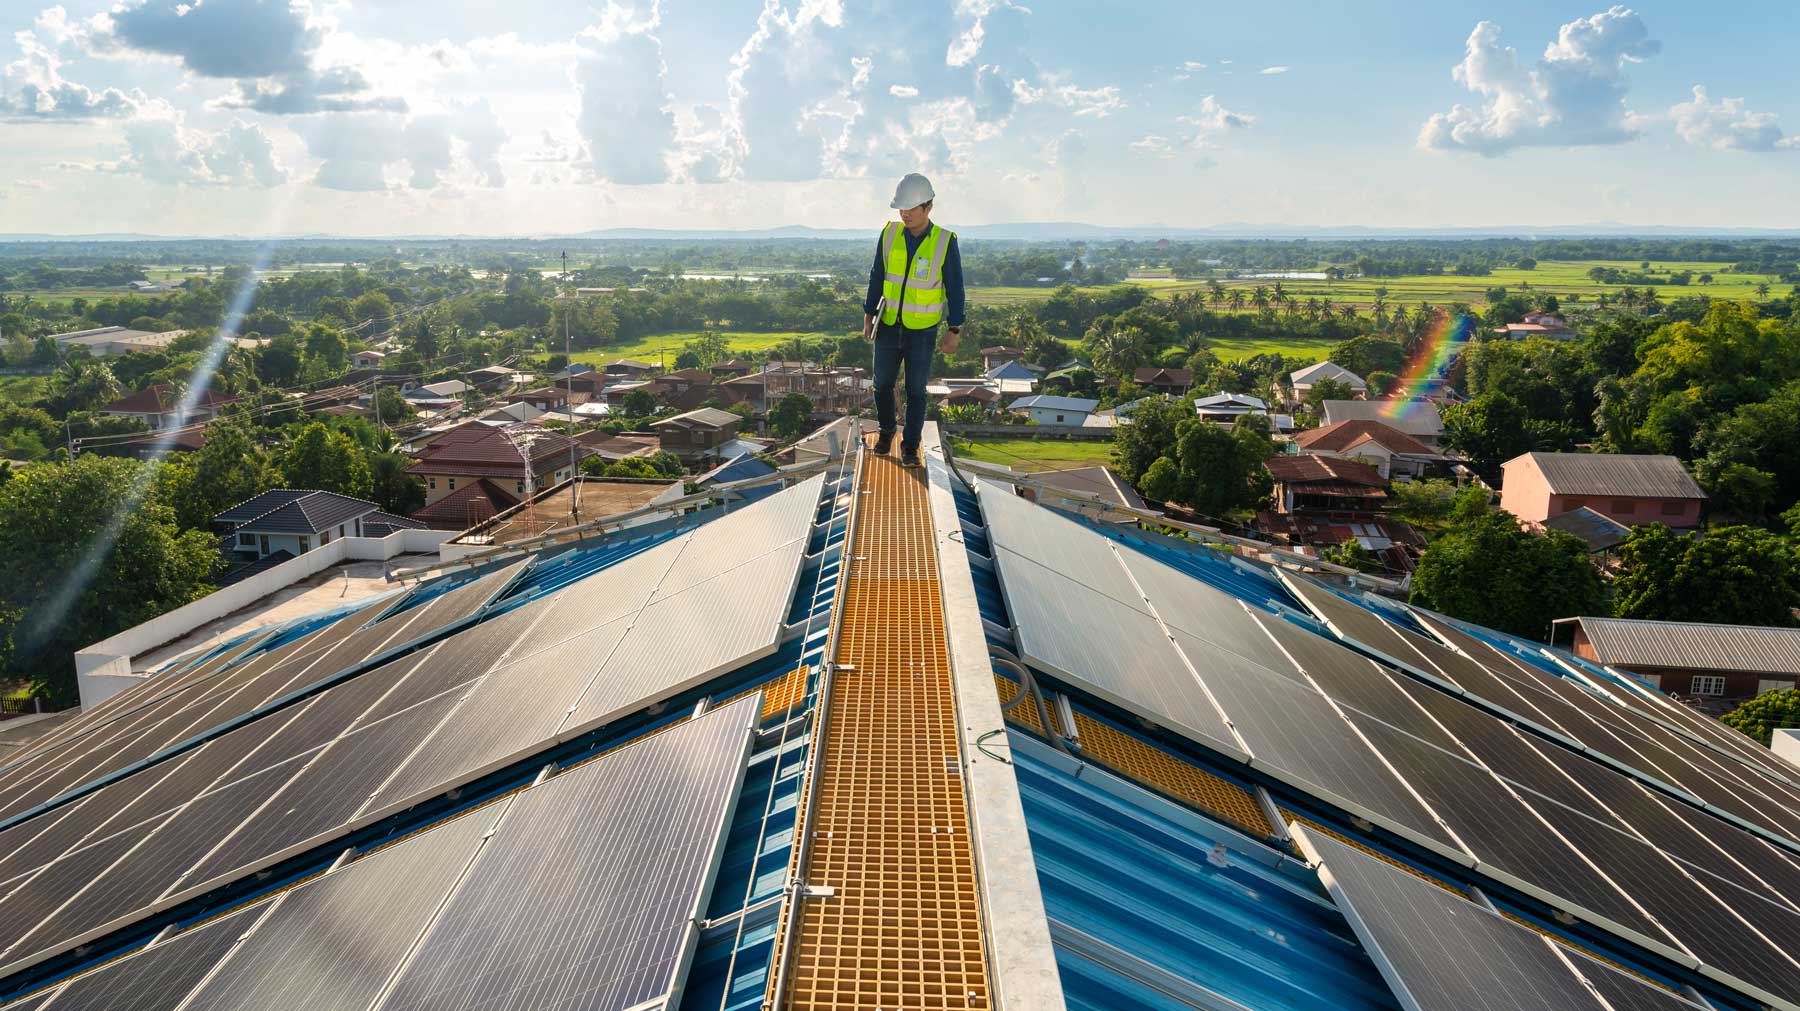 a worker standing on a roof next to solar panels with a town in the background